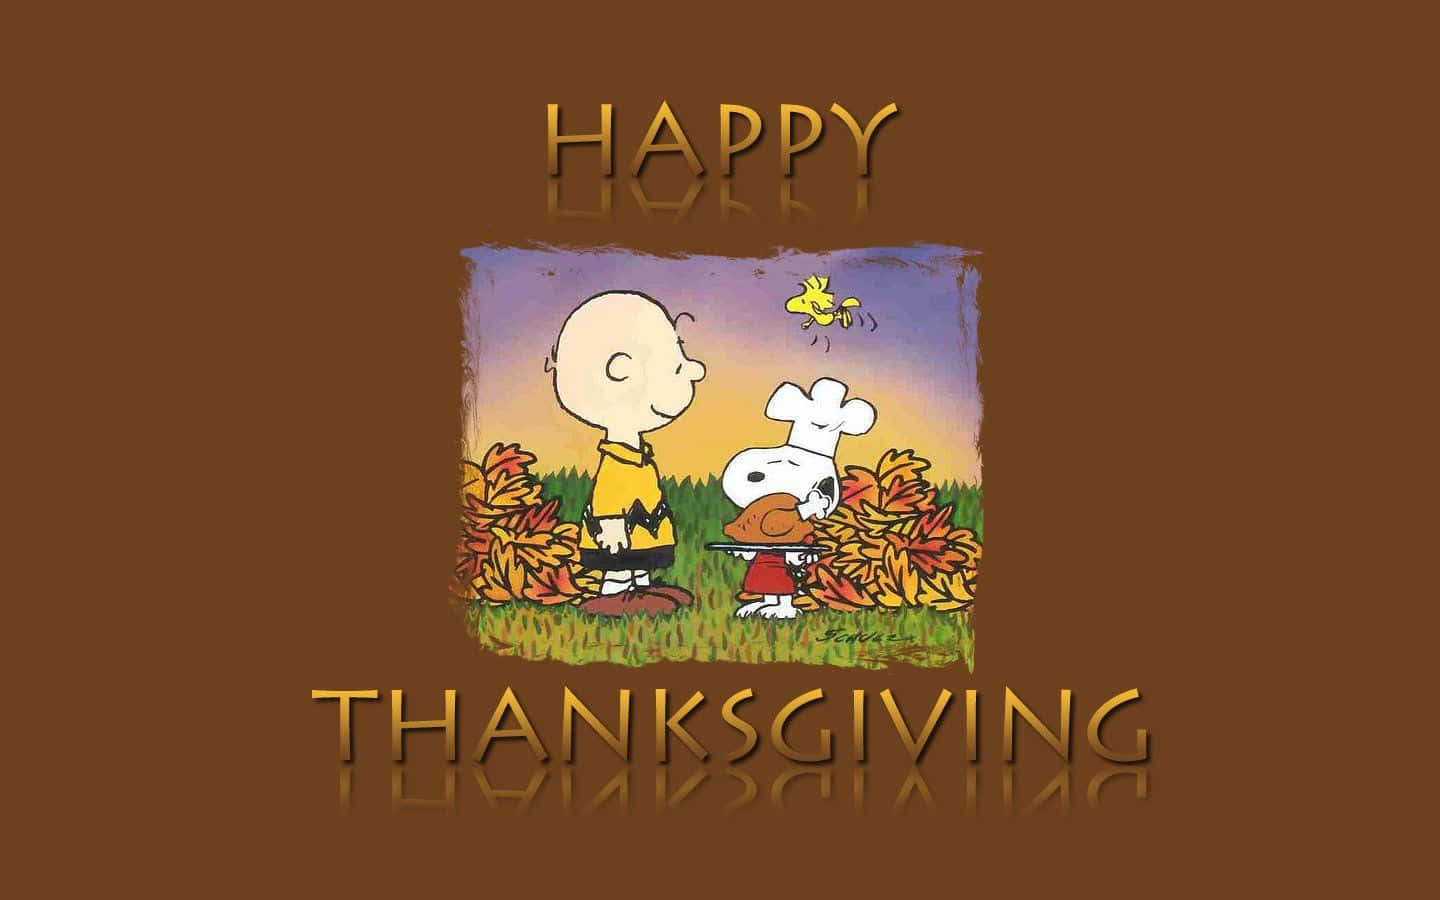 Snoopy And Charlie Brown Happy Thanksgiving Greeting Card Wallpaper